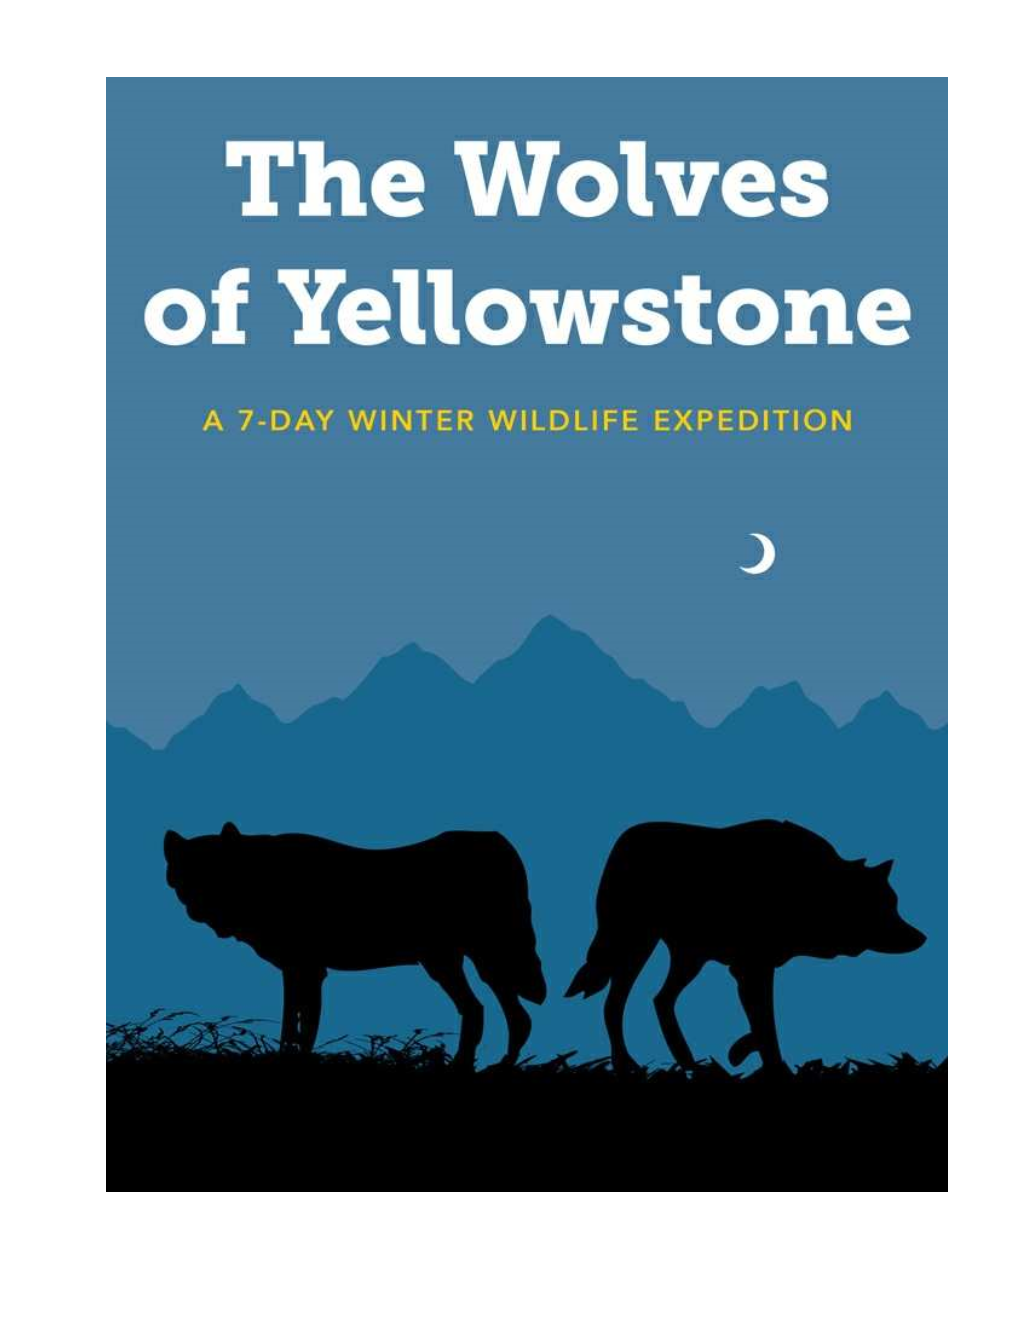 The Wolves of Yellowstone and Learn More About Their Amazing Story of Extirpation and Successful Reintroduction Into This Majestic Ecosystem